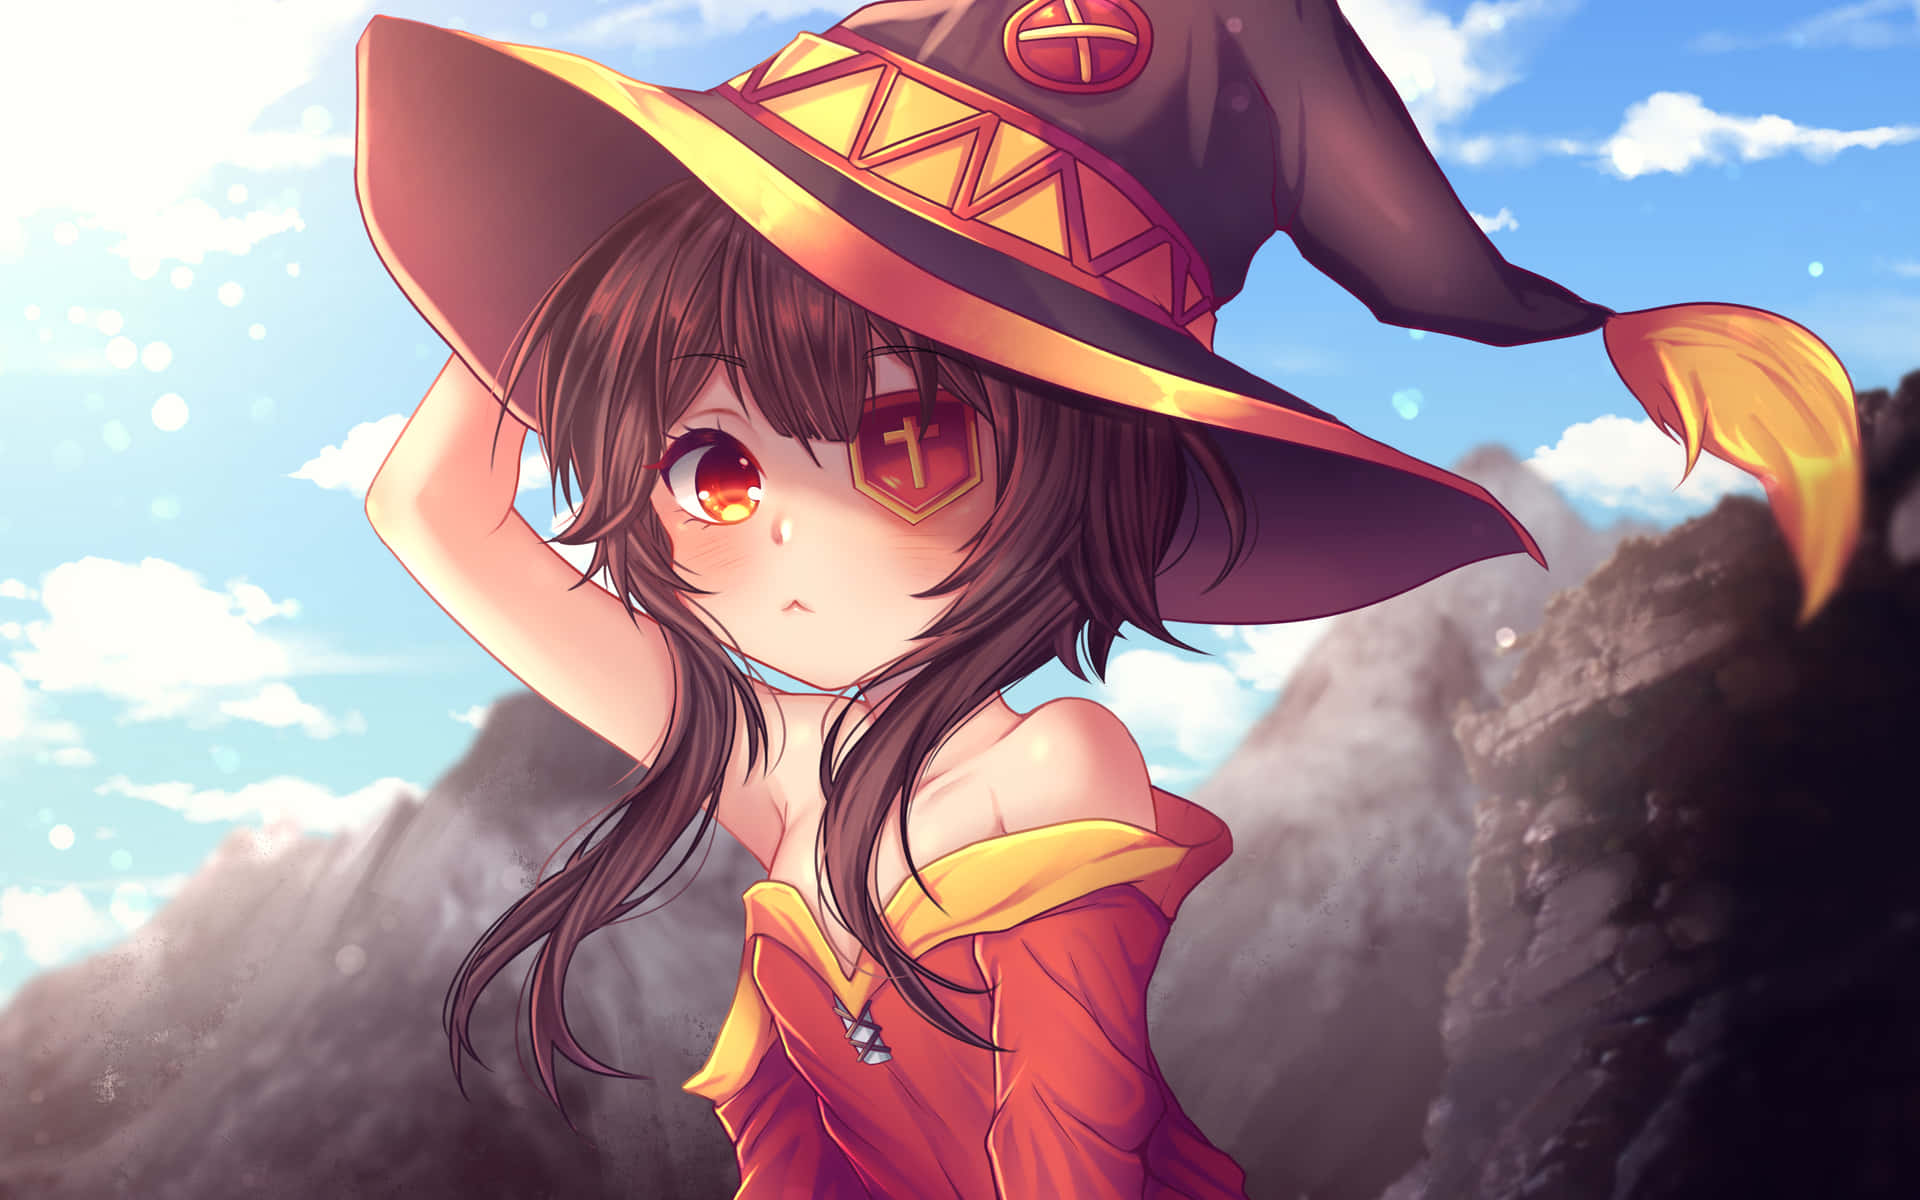 Download Welcome to the world of Adventure with the wittiest adventurers -  Kazuma, Aqua, Megumin and Darkness